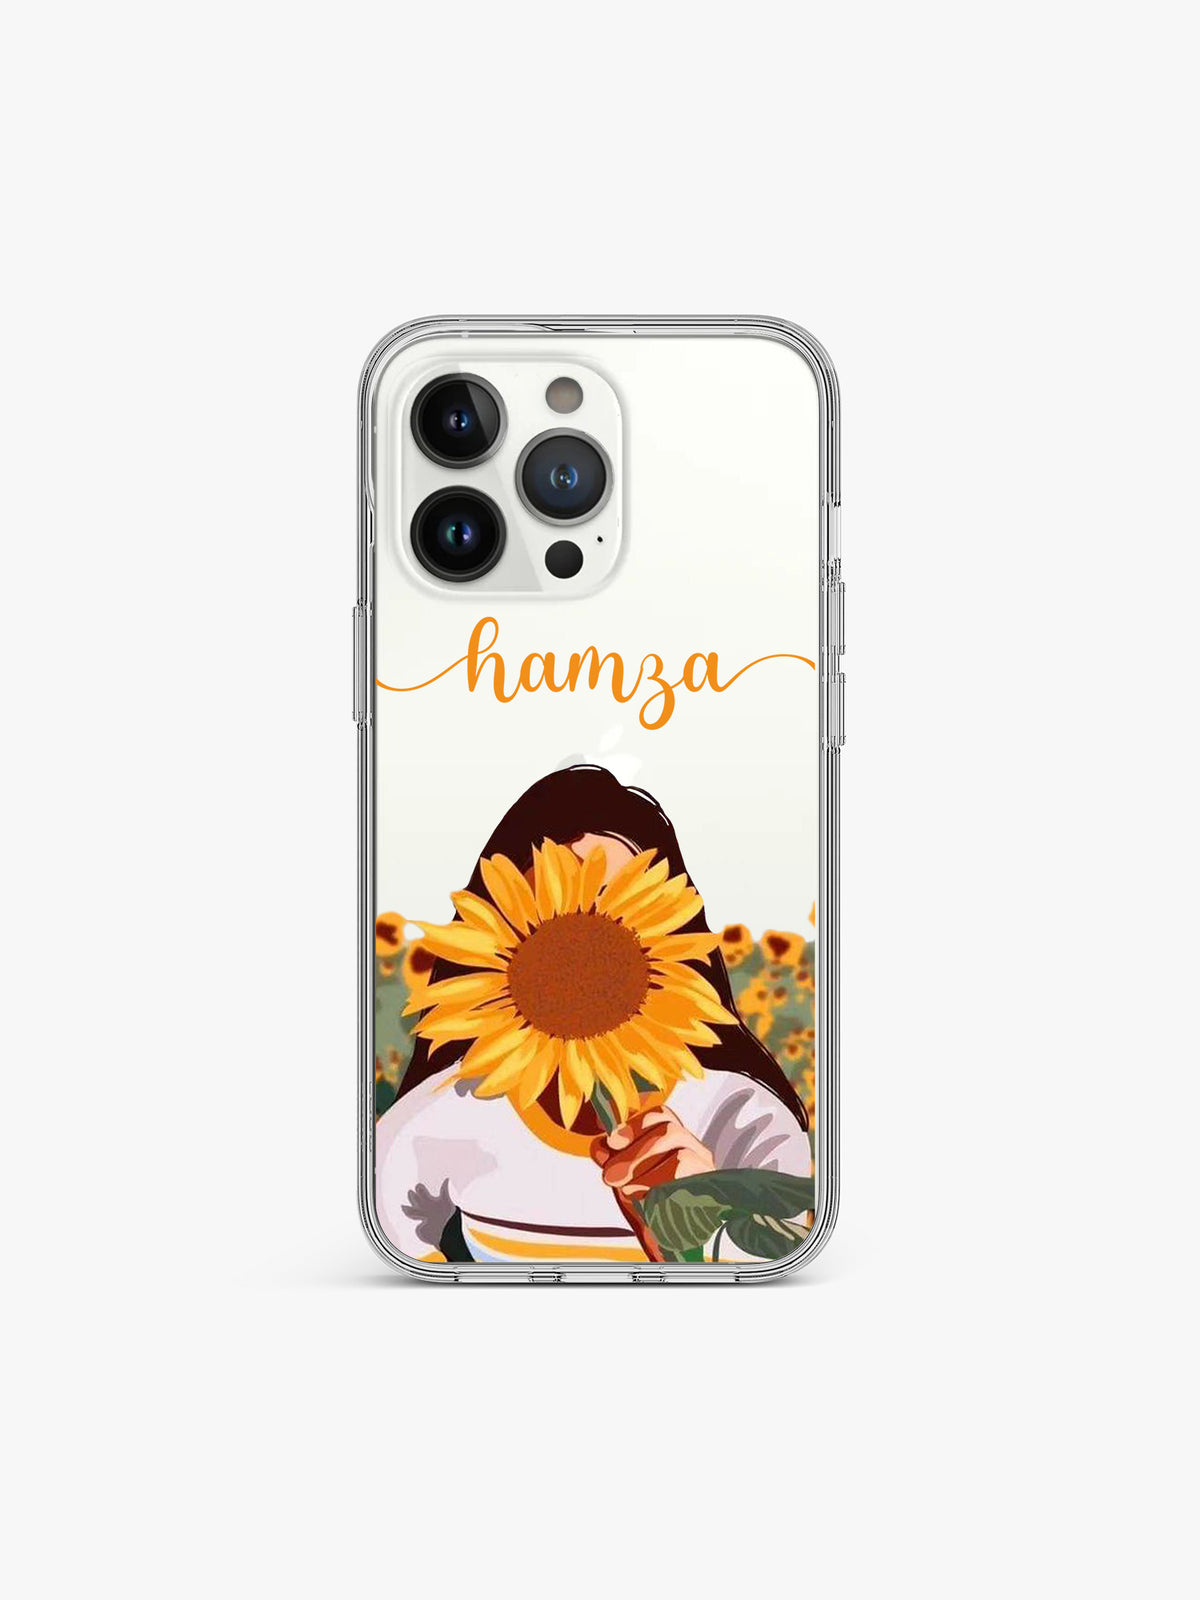 Helianthus Girl Name Printed Clear Silicone Cover